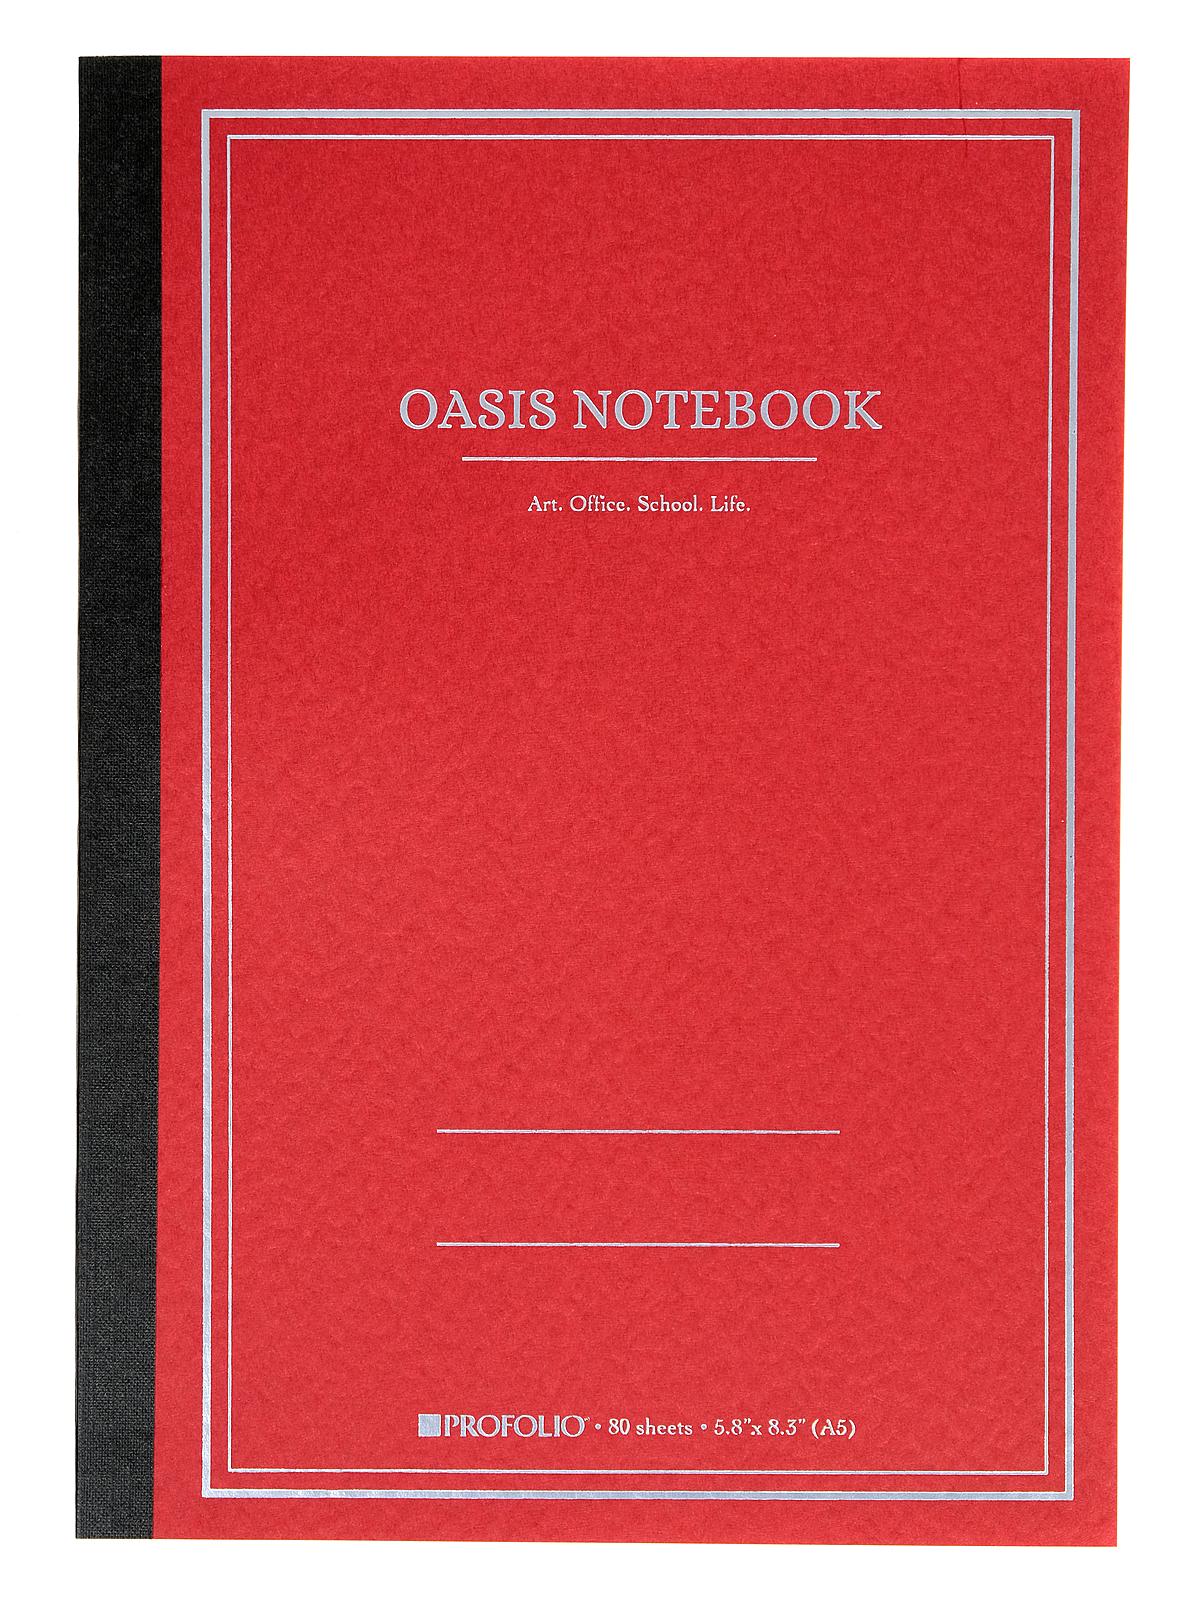 Profolio Oasis Notebook A5 5.8 In. X 8.3 In. Brick 80 Sheets